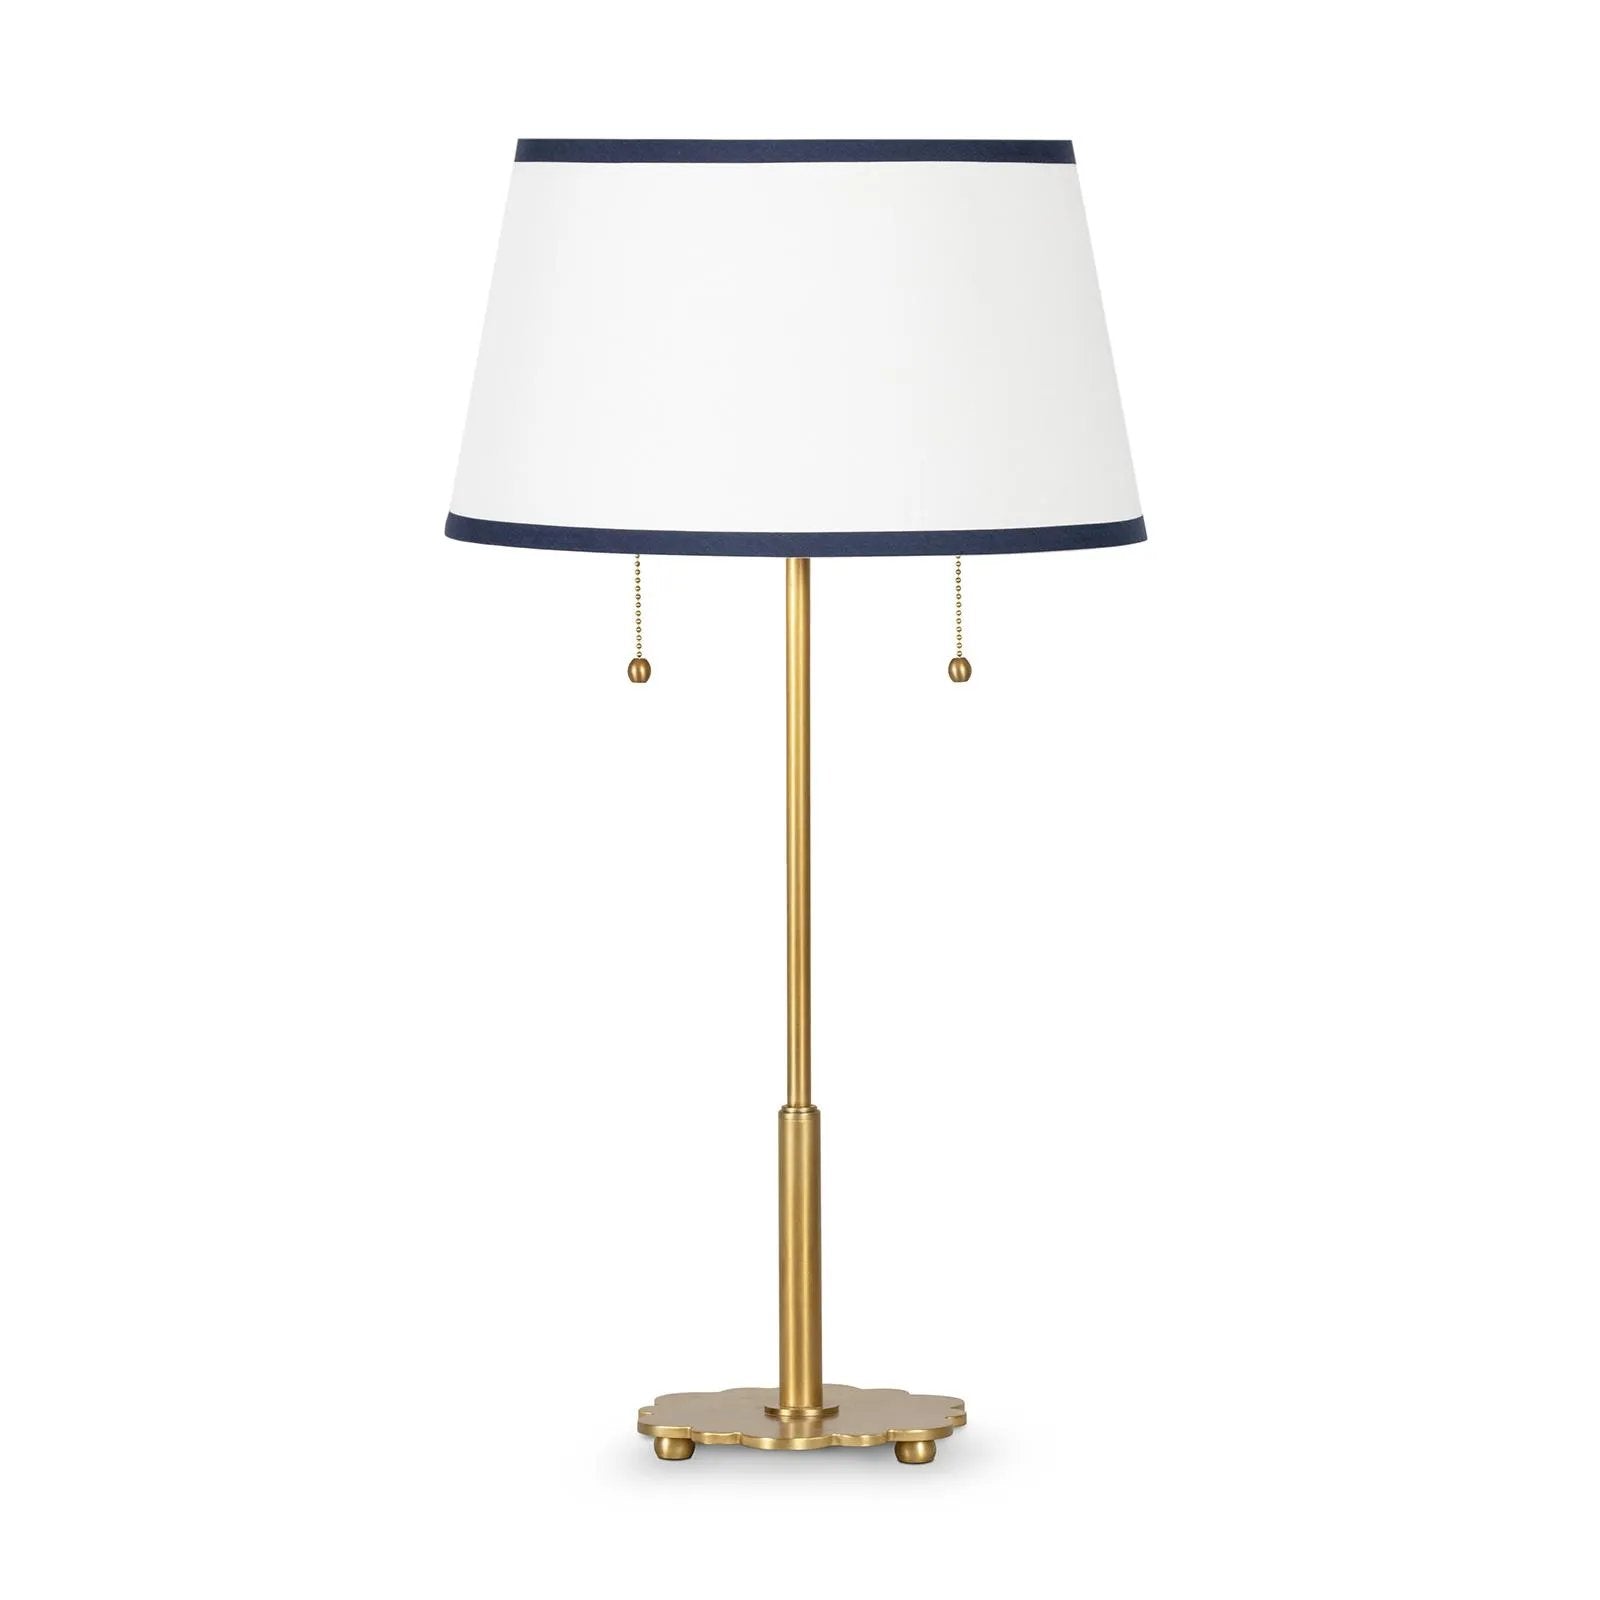 The Daisy Table Lamp is an updated classic with fine details such as its namesake daisy-shaped natural brass base and custom empire shade with navy trim. A part of our Southern Living Lighting Collection, the Daisy is an elegant addition to a dining room, living room or bedroom. Amethyst Home provides interior design, new home construction design consulting, vintage area rugs, and lighting in the Kansas City metro area.